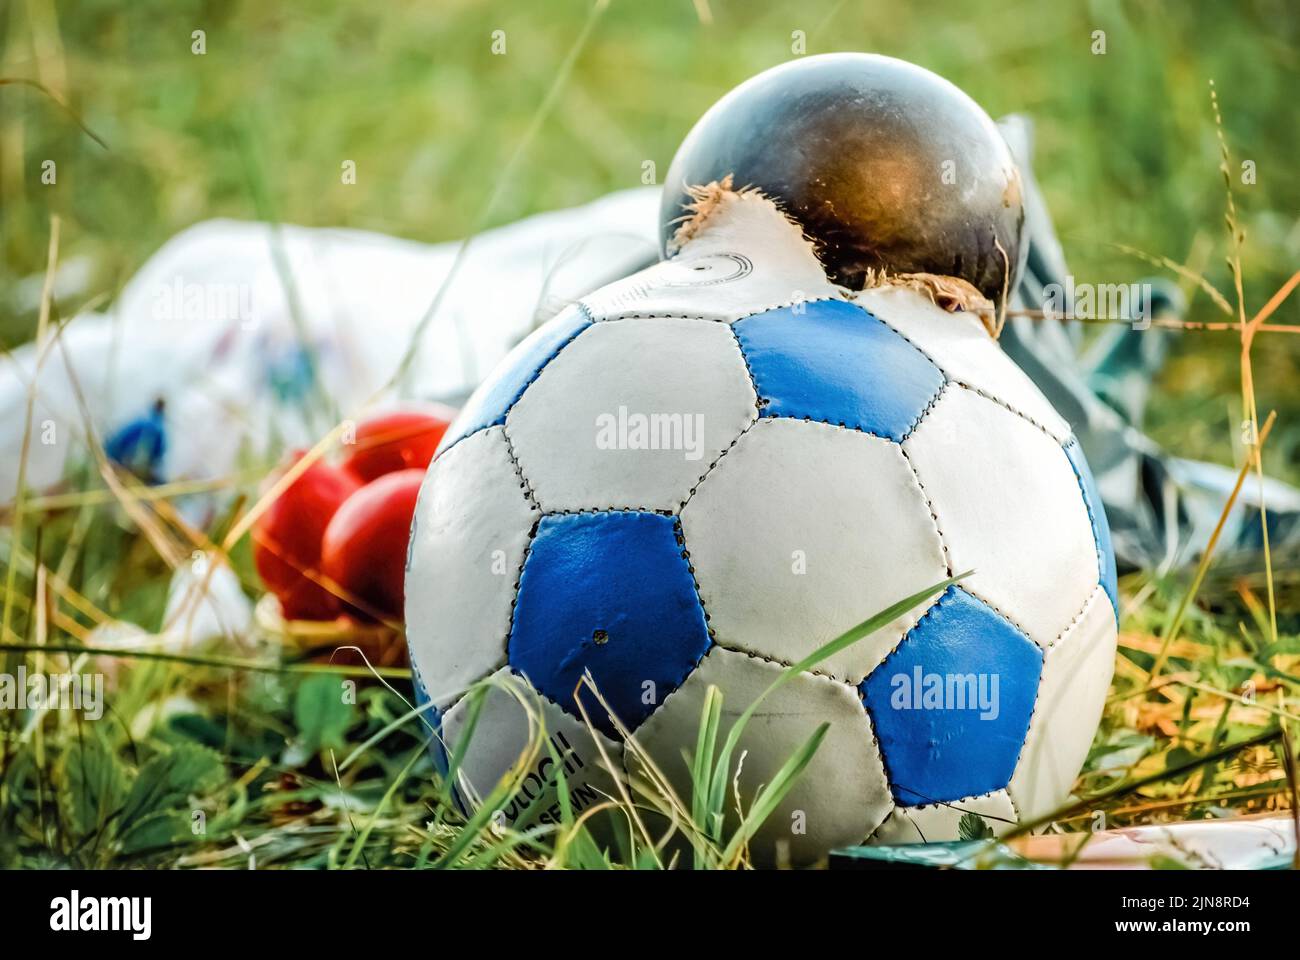 Burst soccer ball lies in pile of garbage on green grass in city. Torn ball thrown as rubbish after playing football game close view Stock Photo